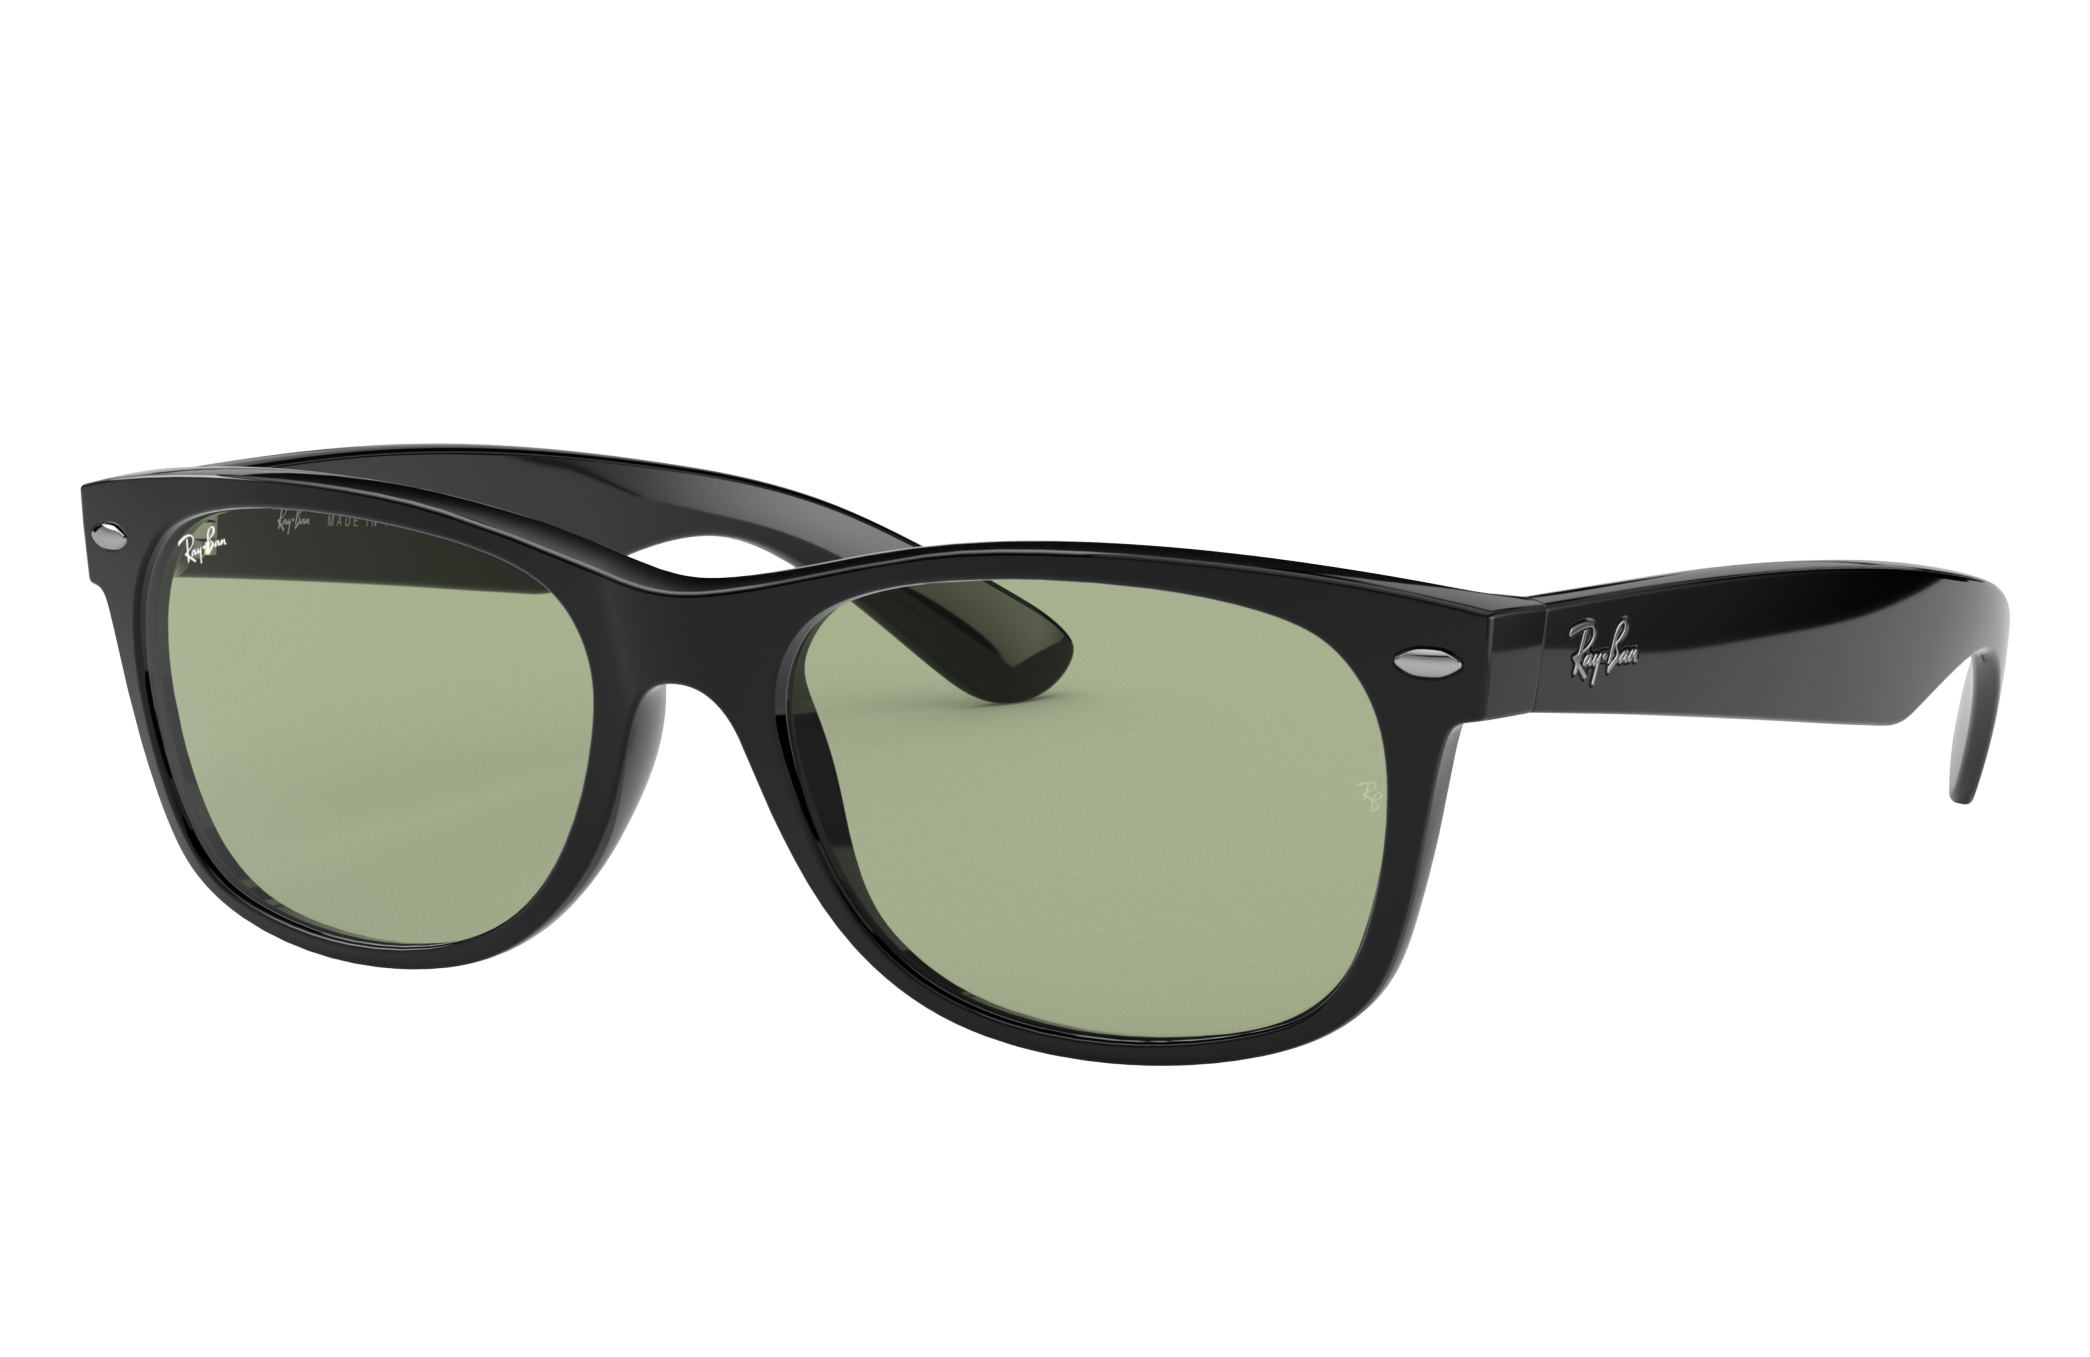 New Wayfarer Washed Lenses Sunglasses in Black and Green - RB2132F